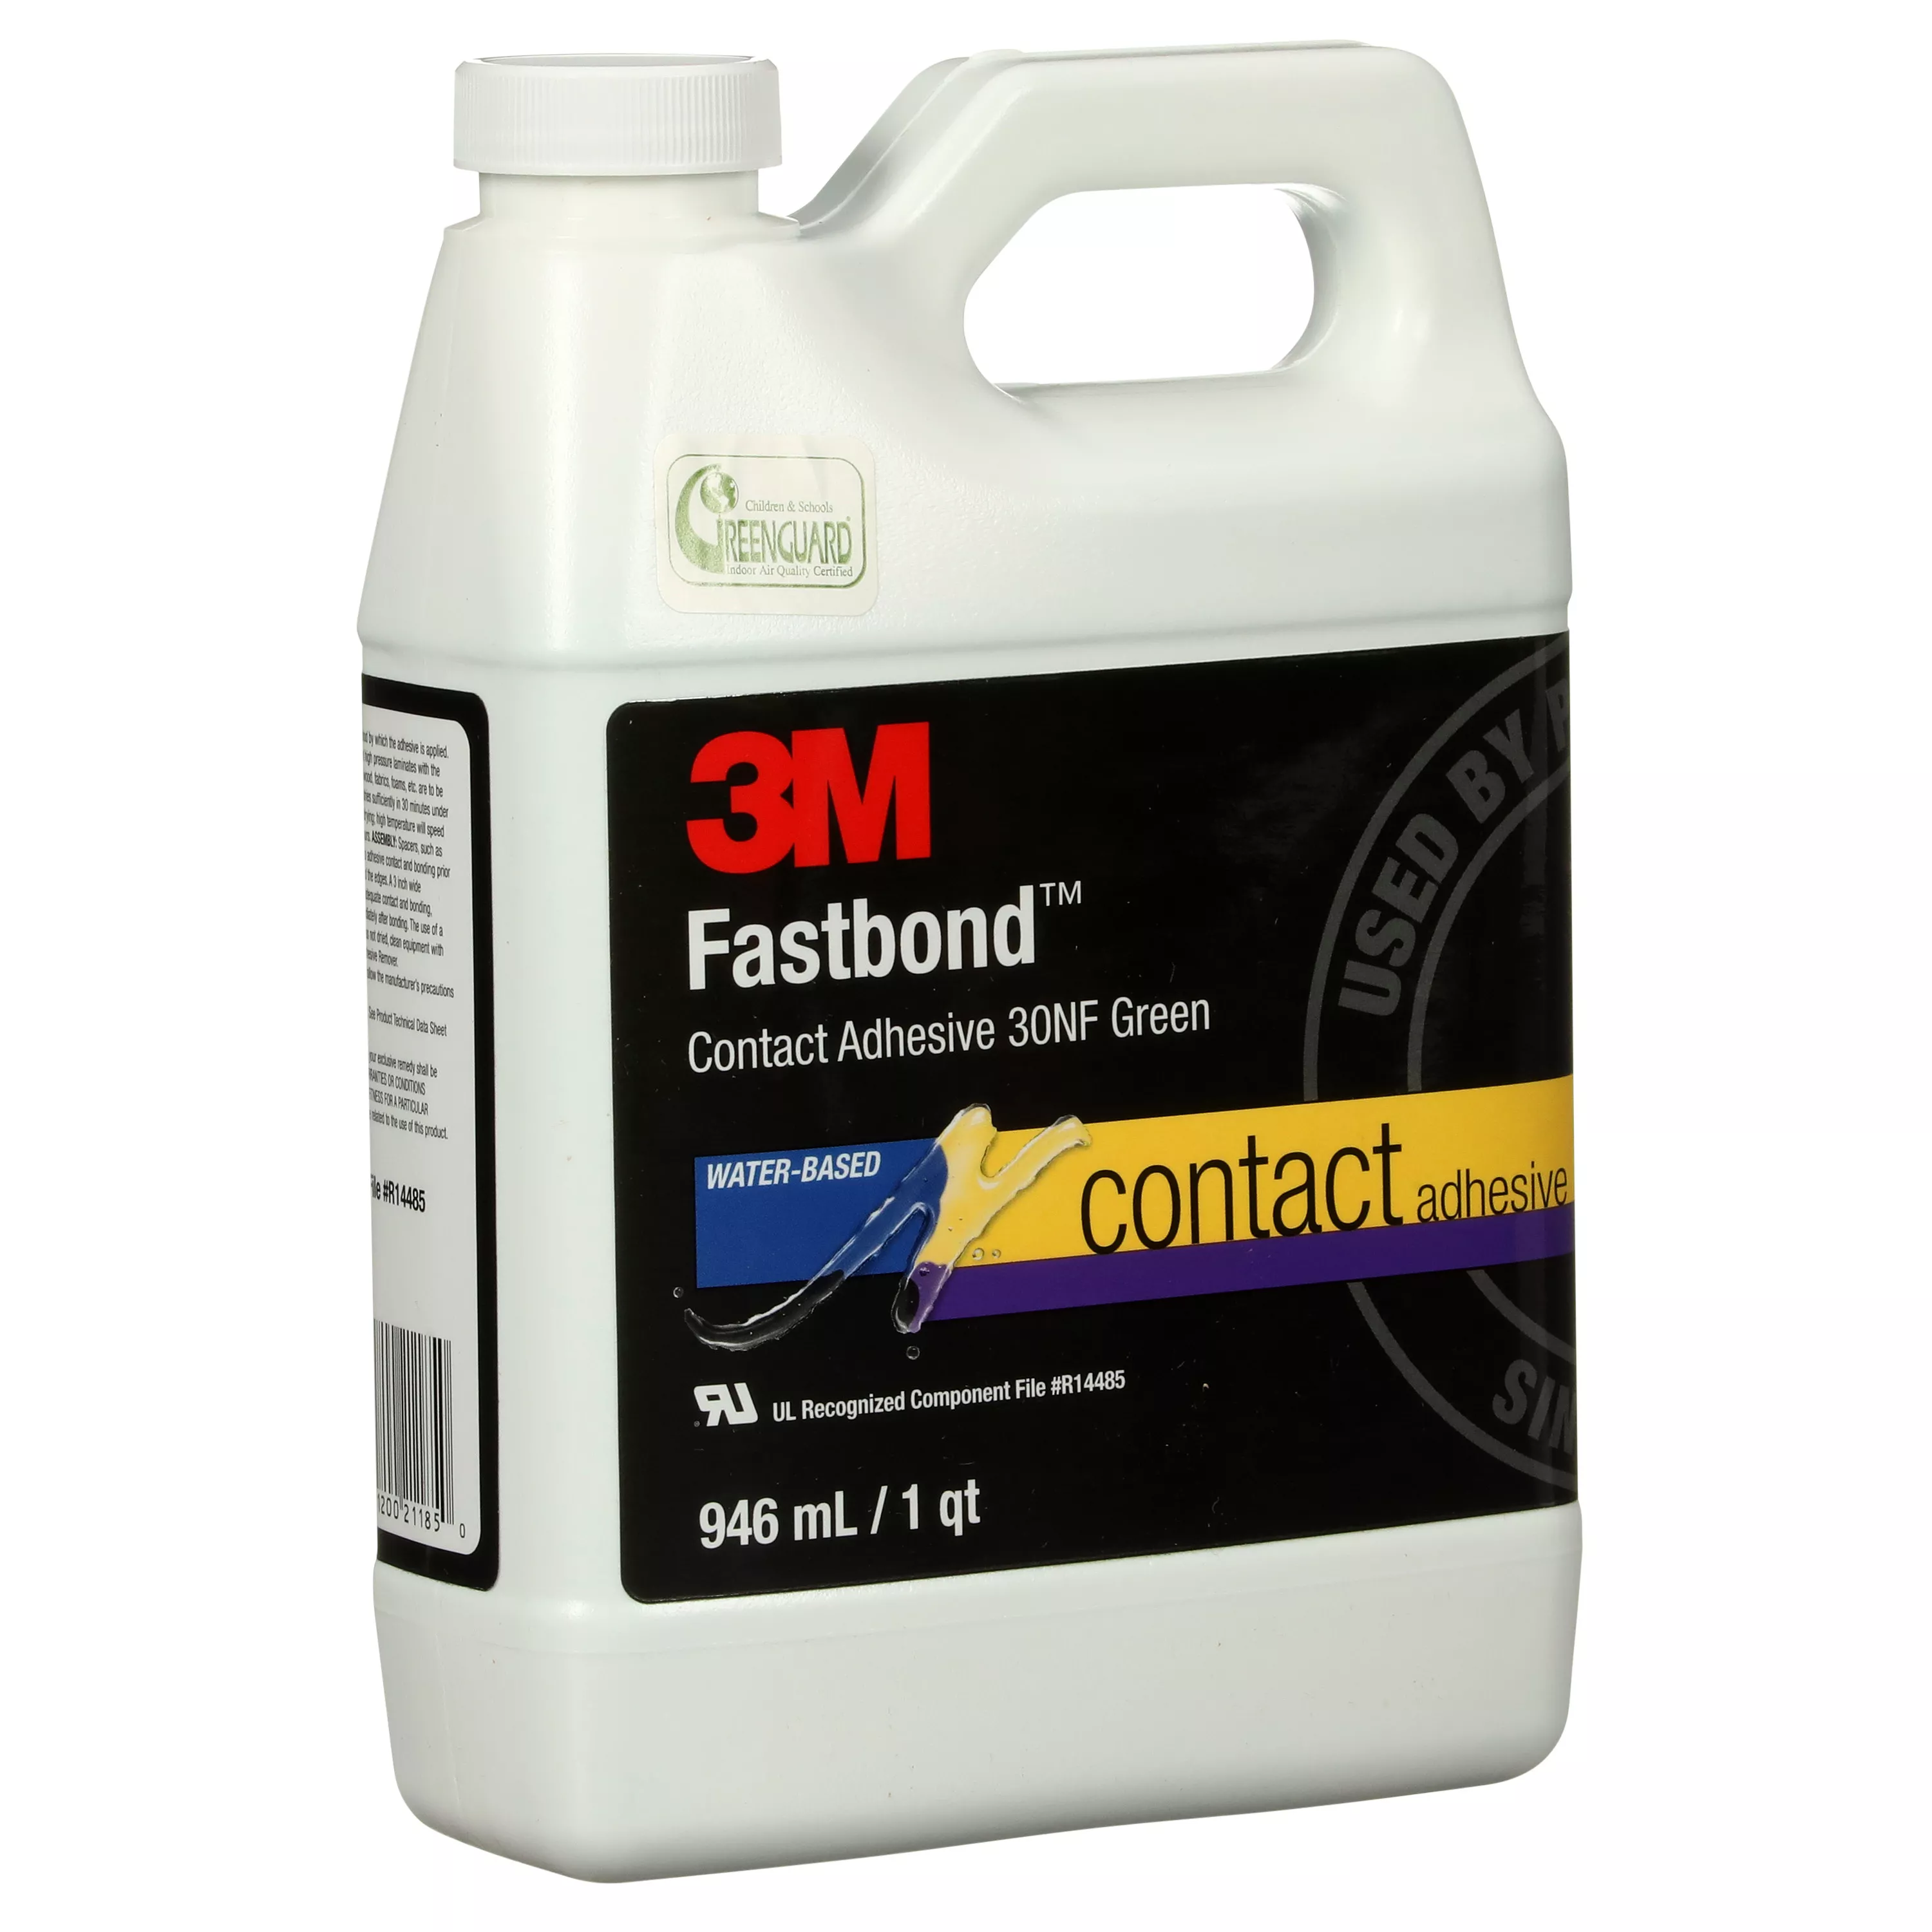 SKU 7100017732 | 3M™ Fastbond™ Contact Adhesive 30NF